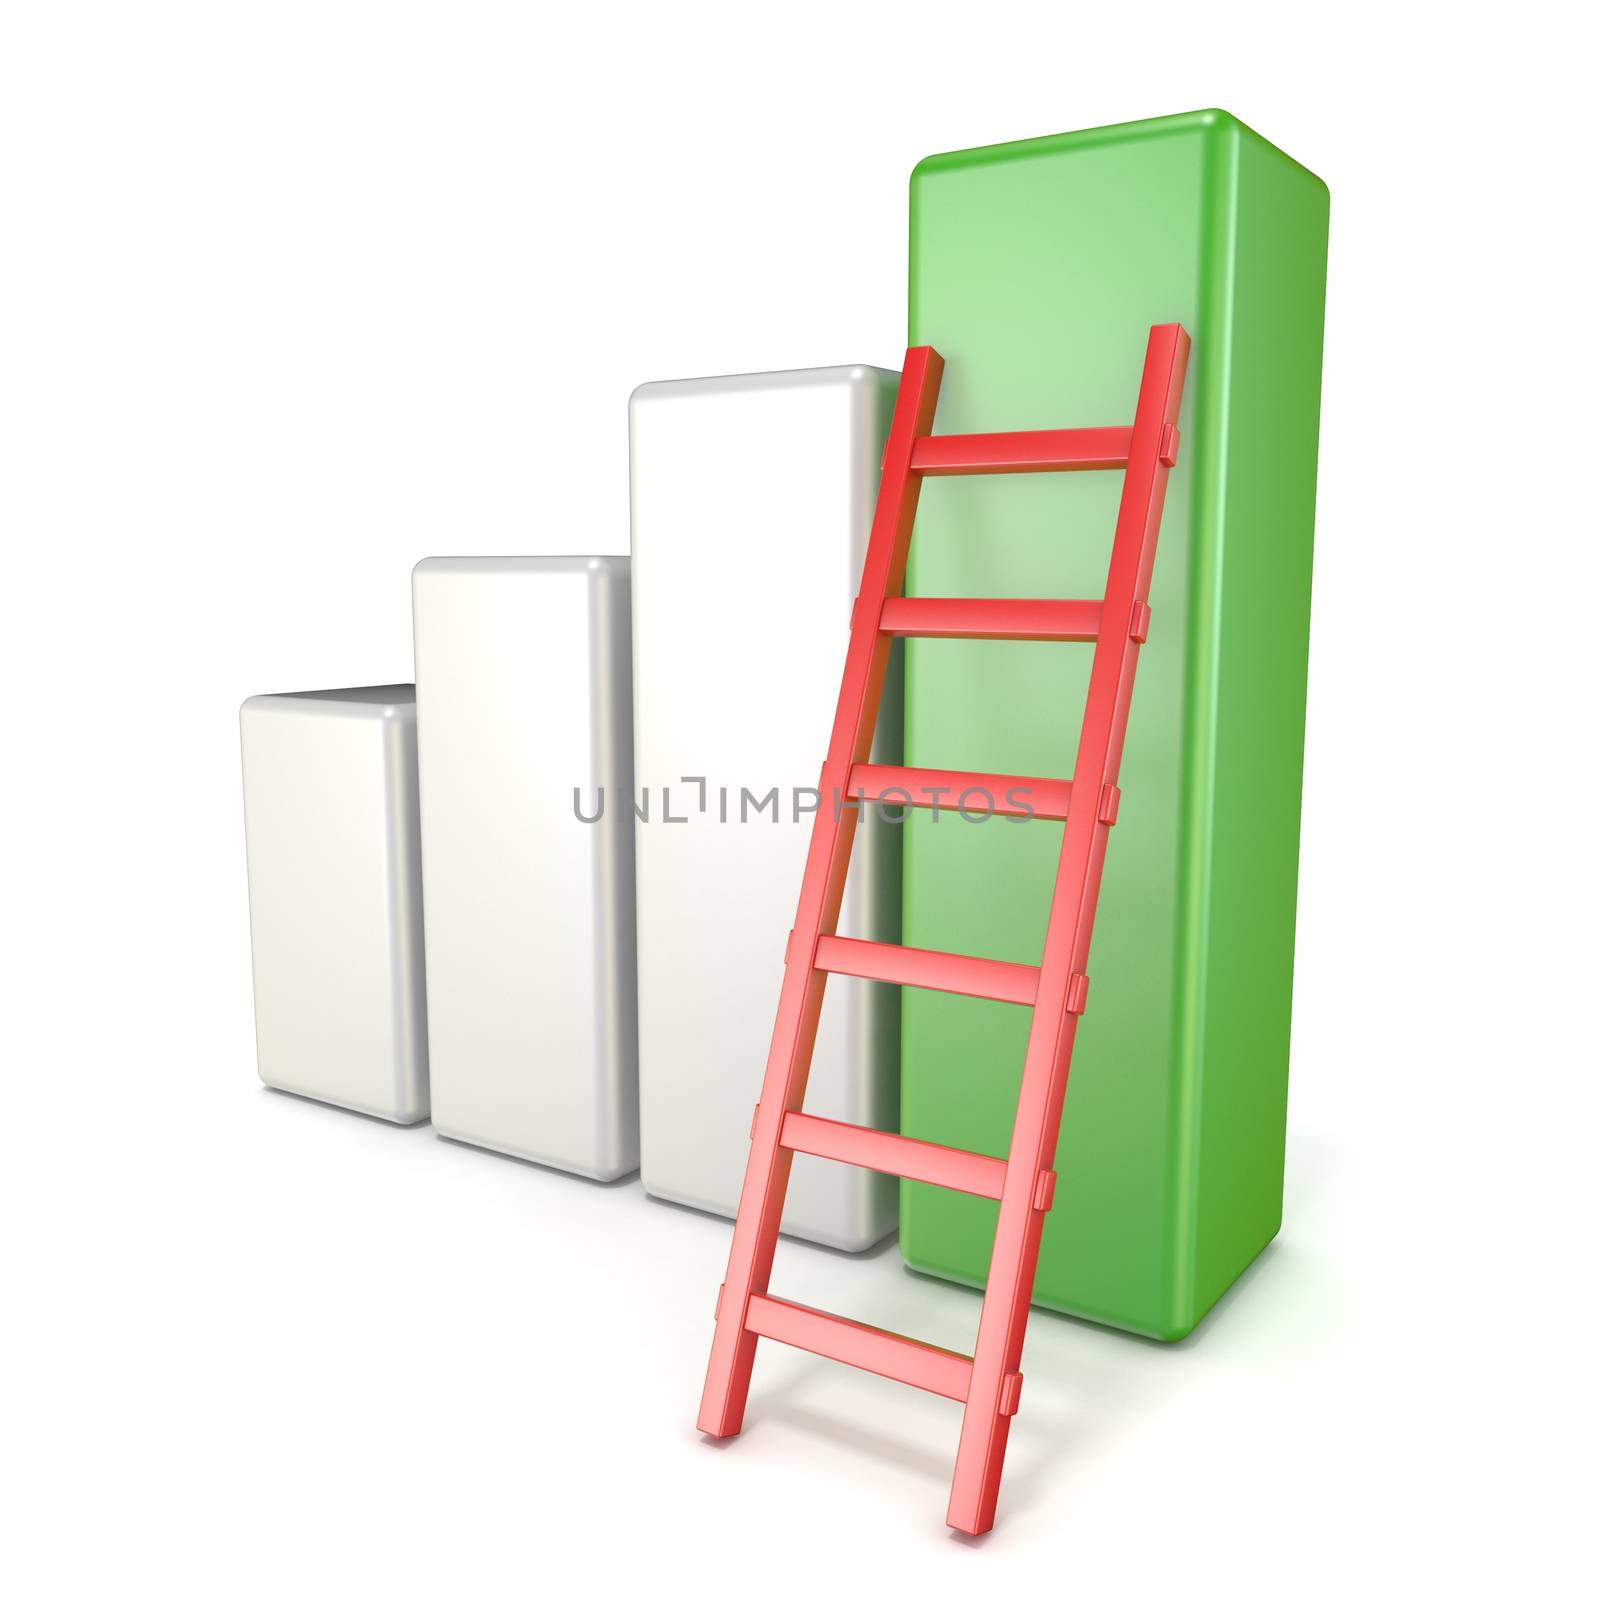 Statistic graph with ladder. Success concept. 3D render illustration isolated on white background